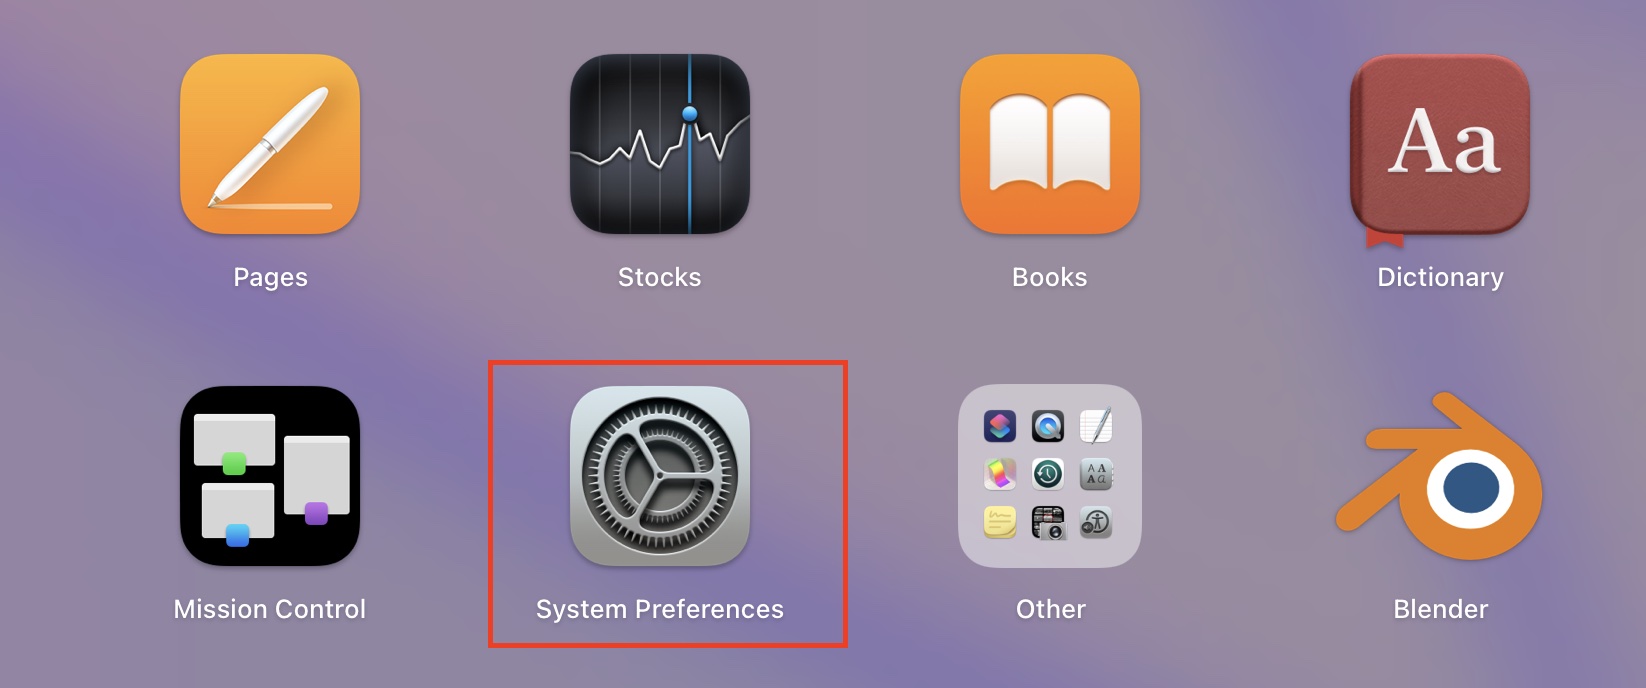 How to use Universal Control on your Mac and iPad - Step by Step Tutorial